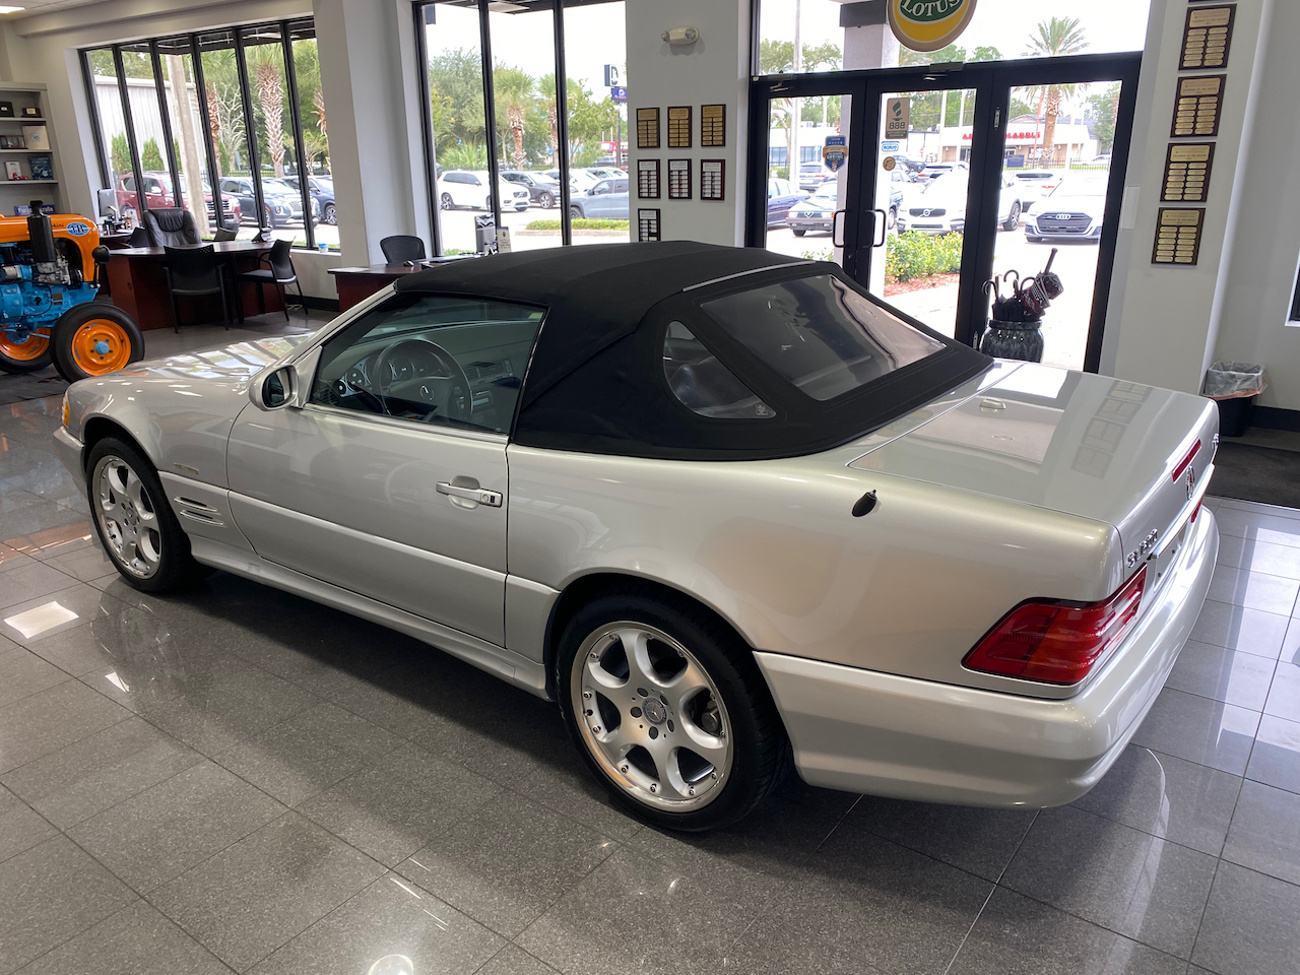 2002 Mercedes-Benz SL 500 For Sale By Auction